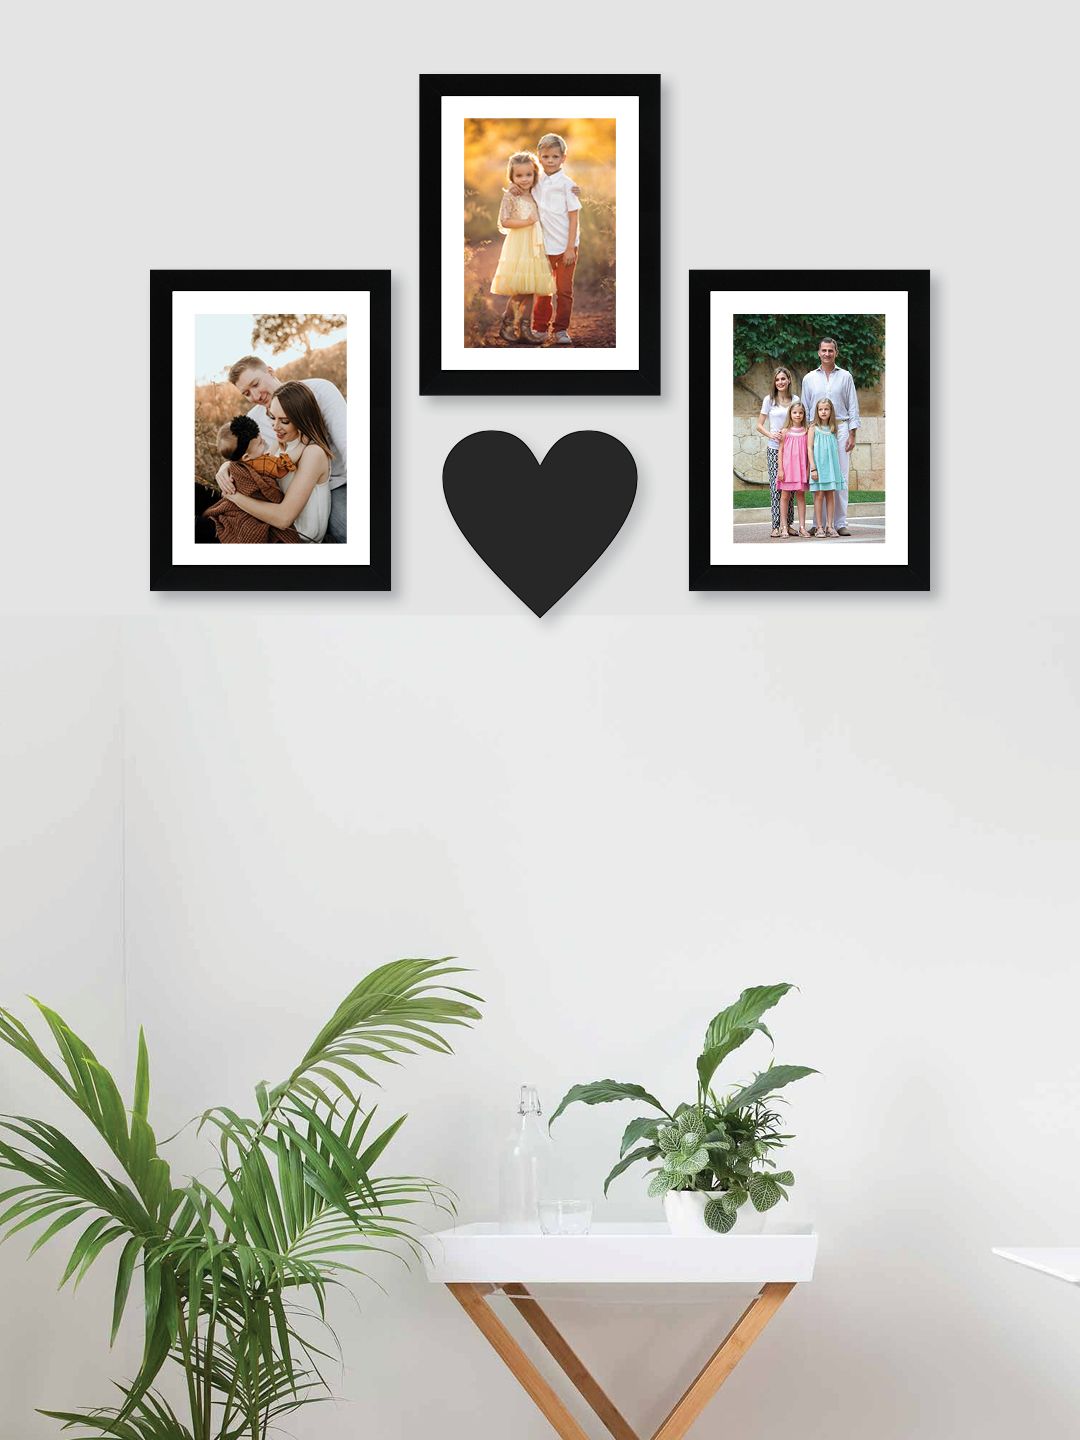 RANDOM Set of 3 Black Solid New Synthetic Photo Frames with Heart Plaque Price in India